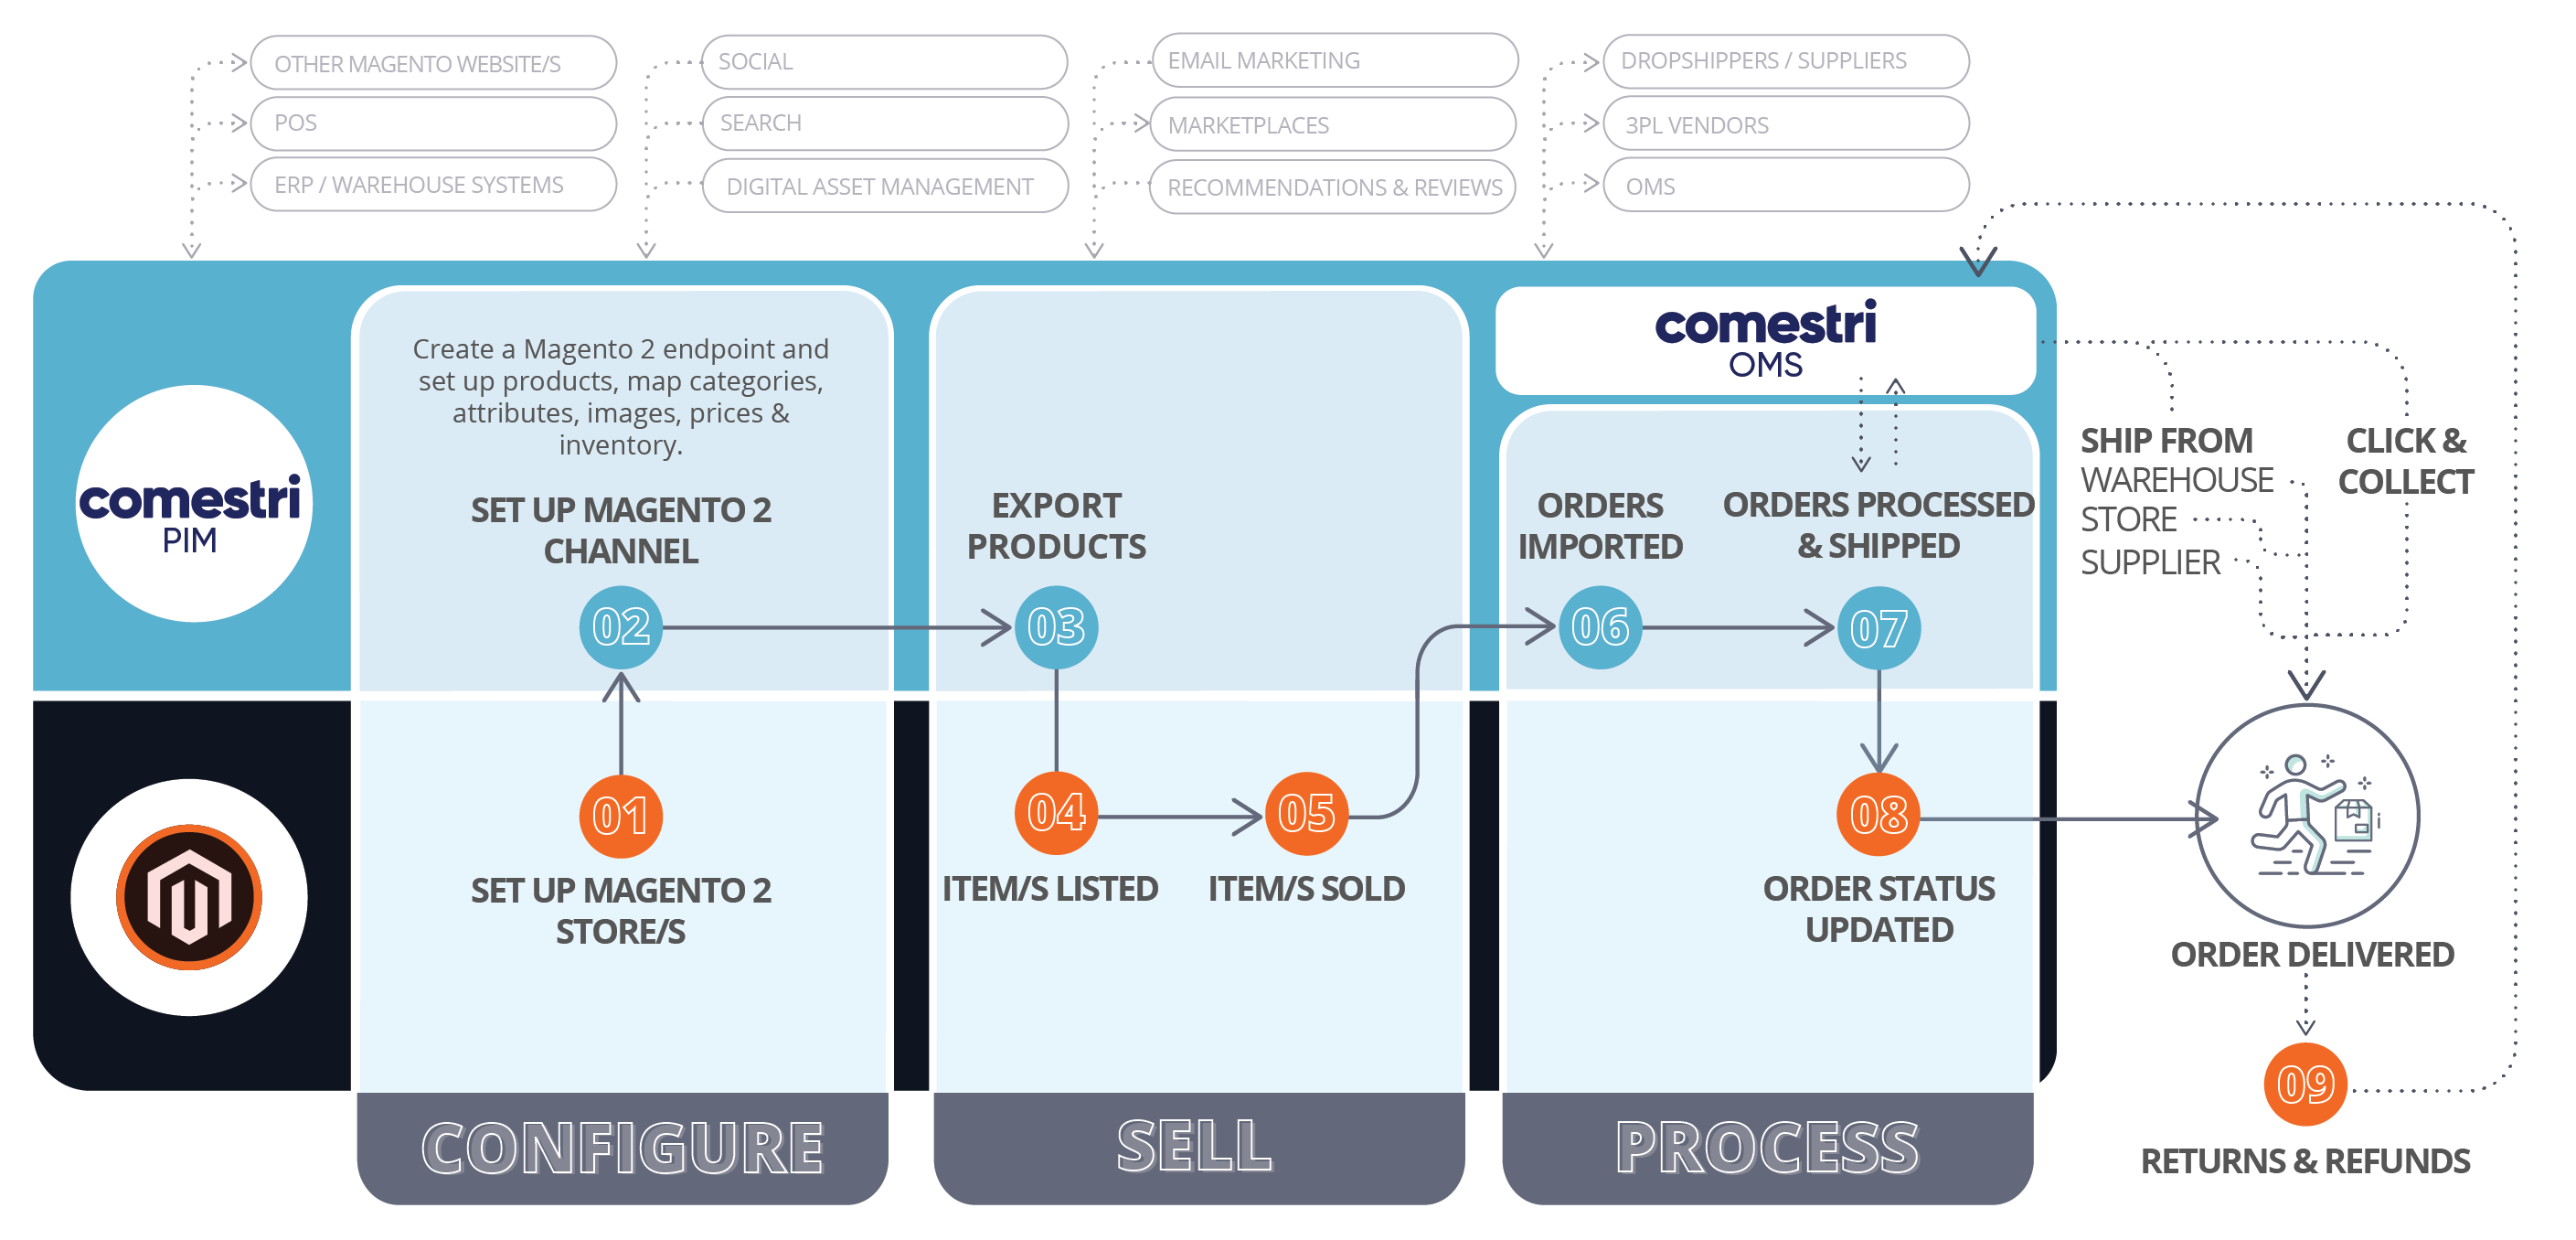 How Magento 2 integrates with Comestri